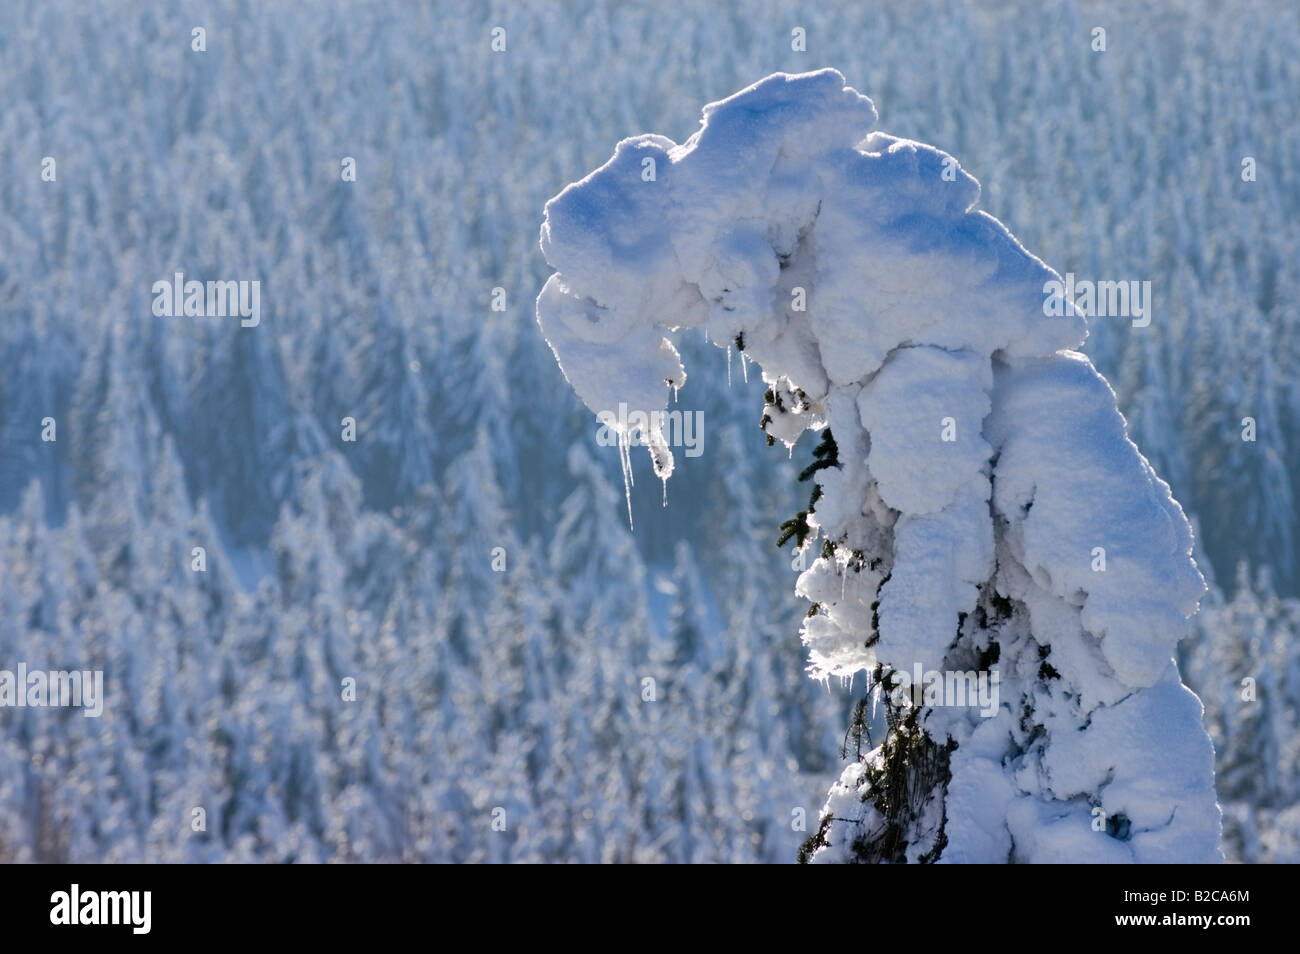 frozen winter time in the bavarian forest europe germany snow covered spruces at region named Geisskopf Bayerischer Wald Stock Photo